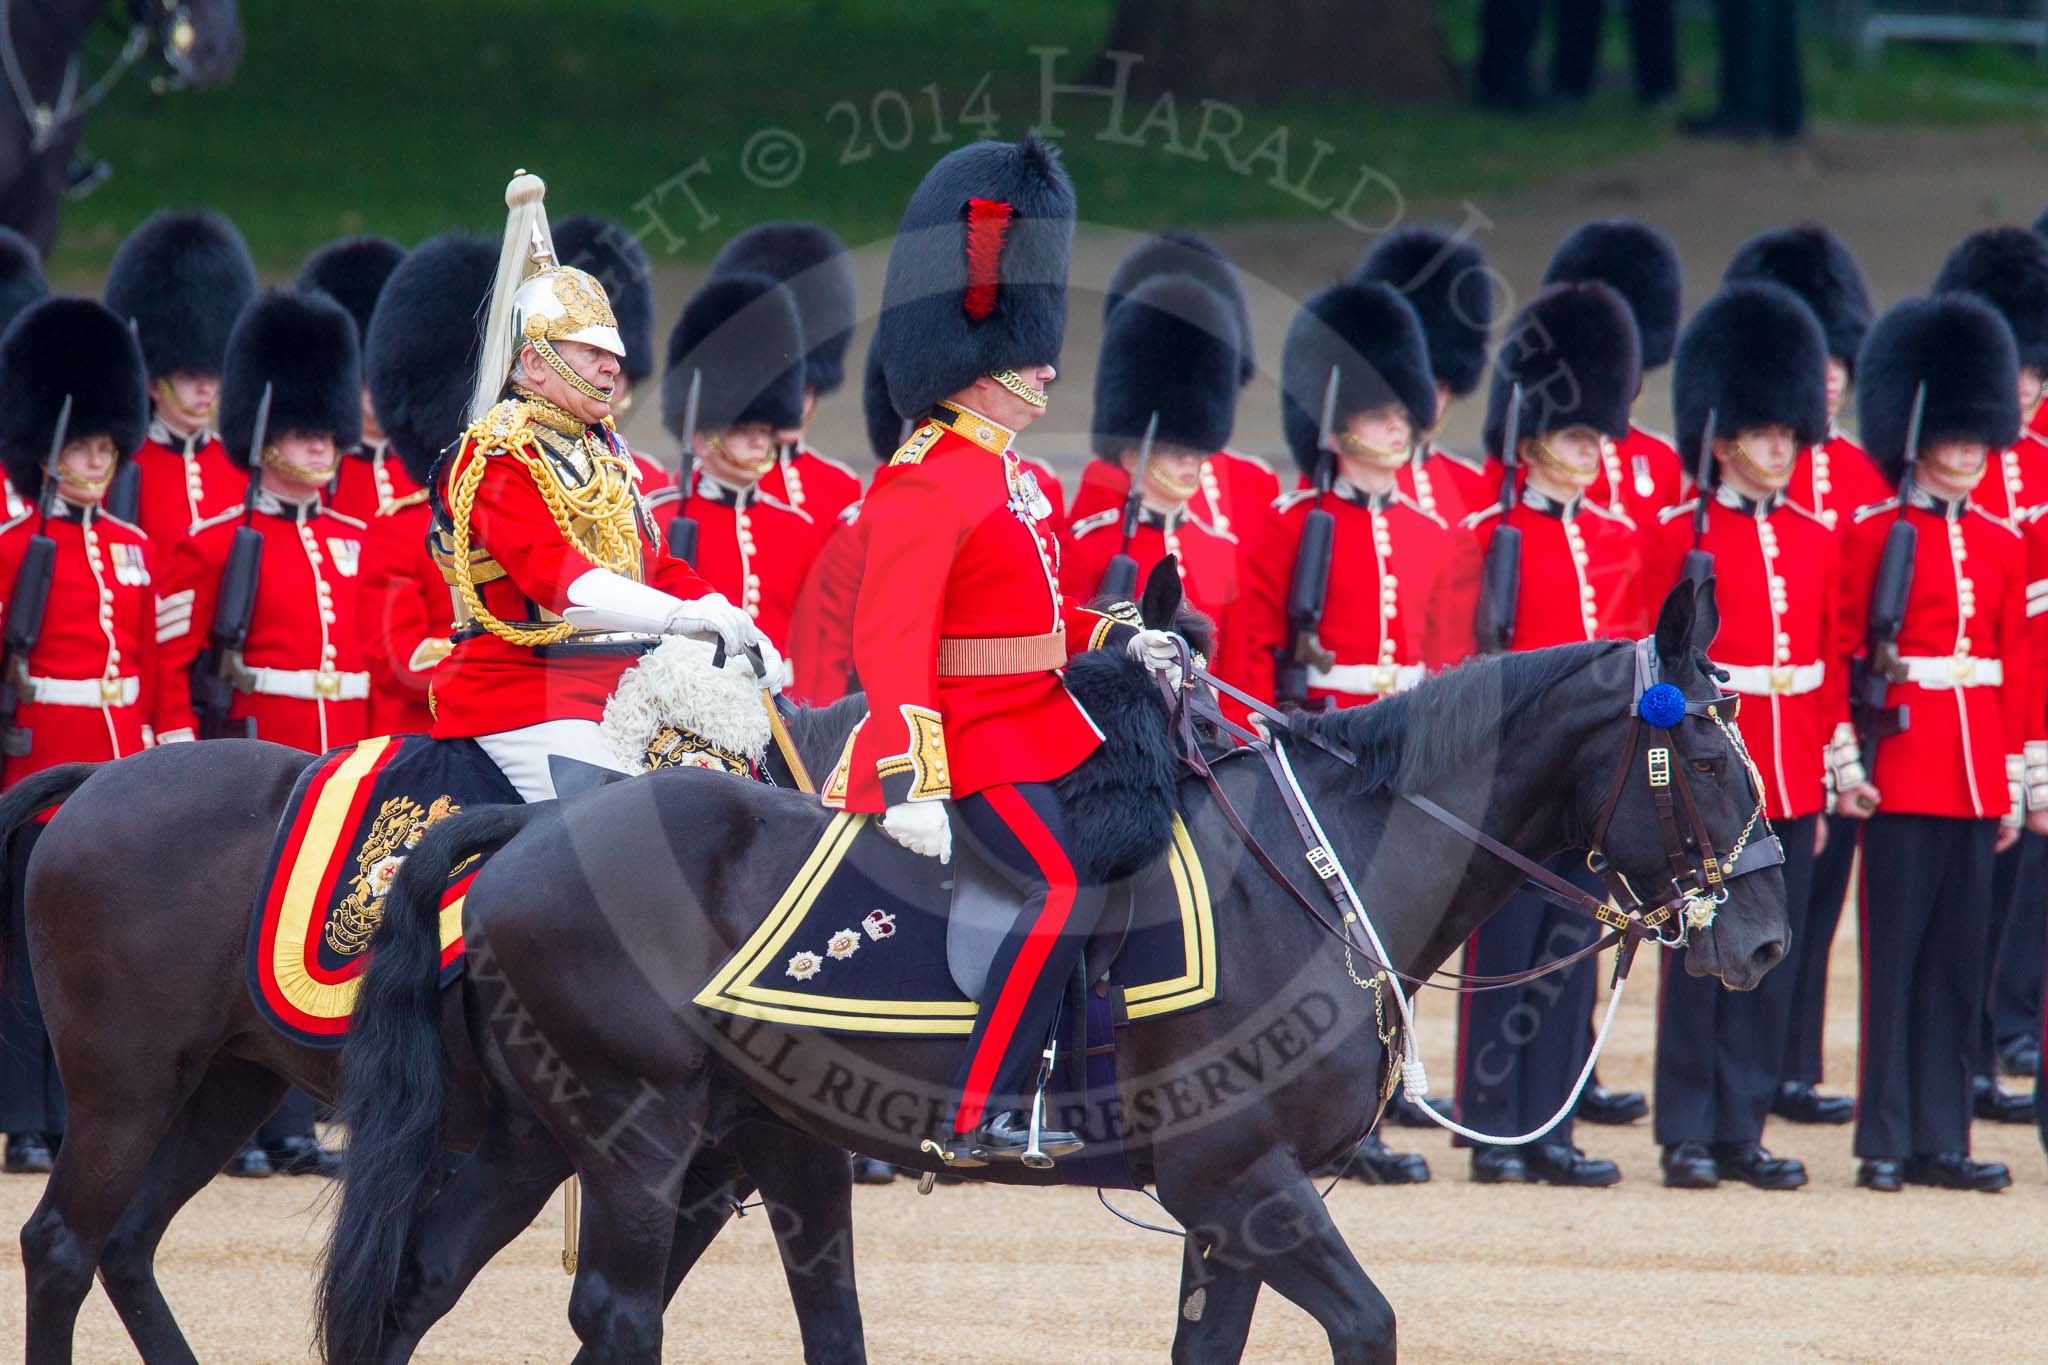 Trooping the Colour 2014.
Horse Guards Parade, Westminster,
London SW1A,

United Kingdom,
on 14 June 2014 at 11:05, image #420